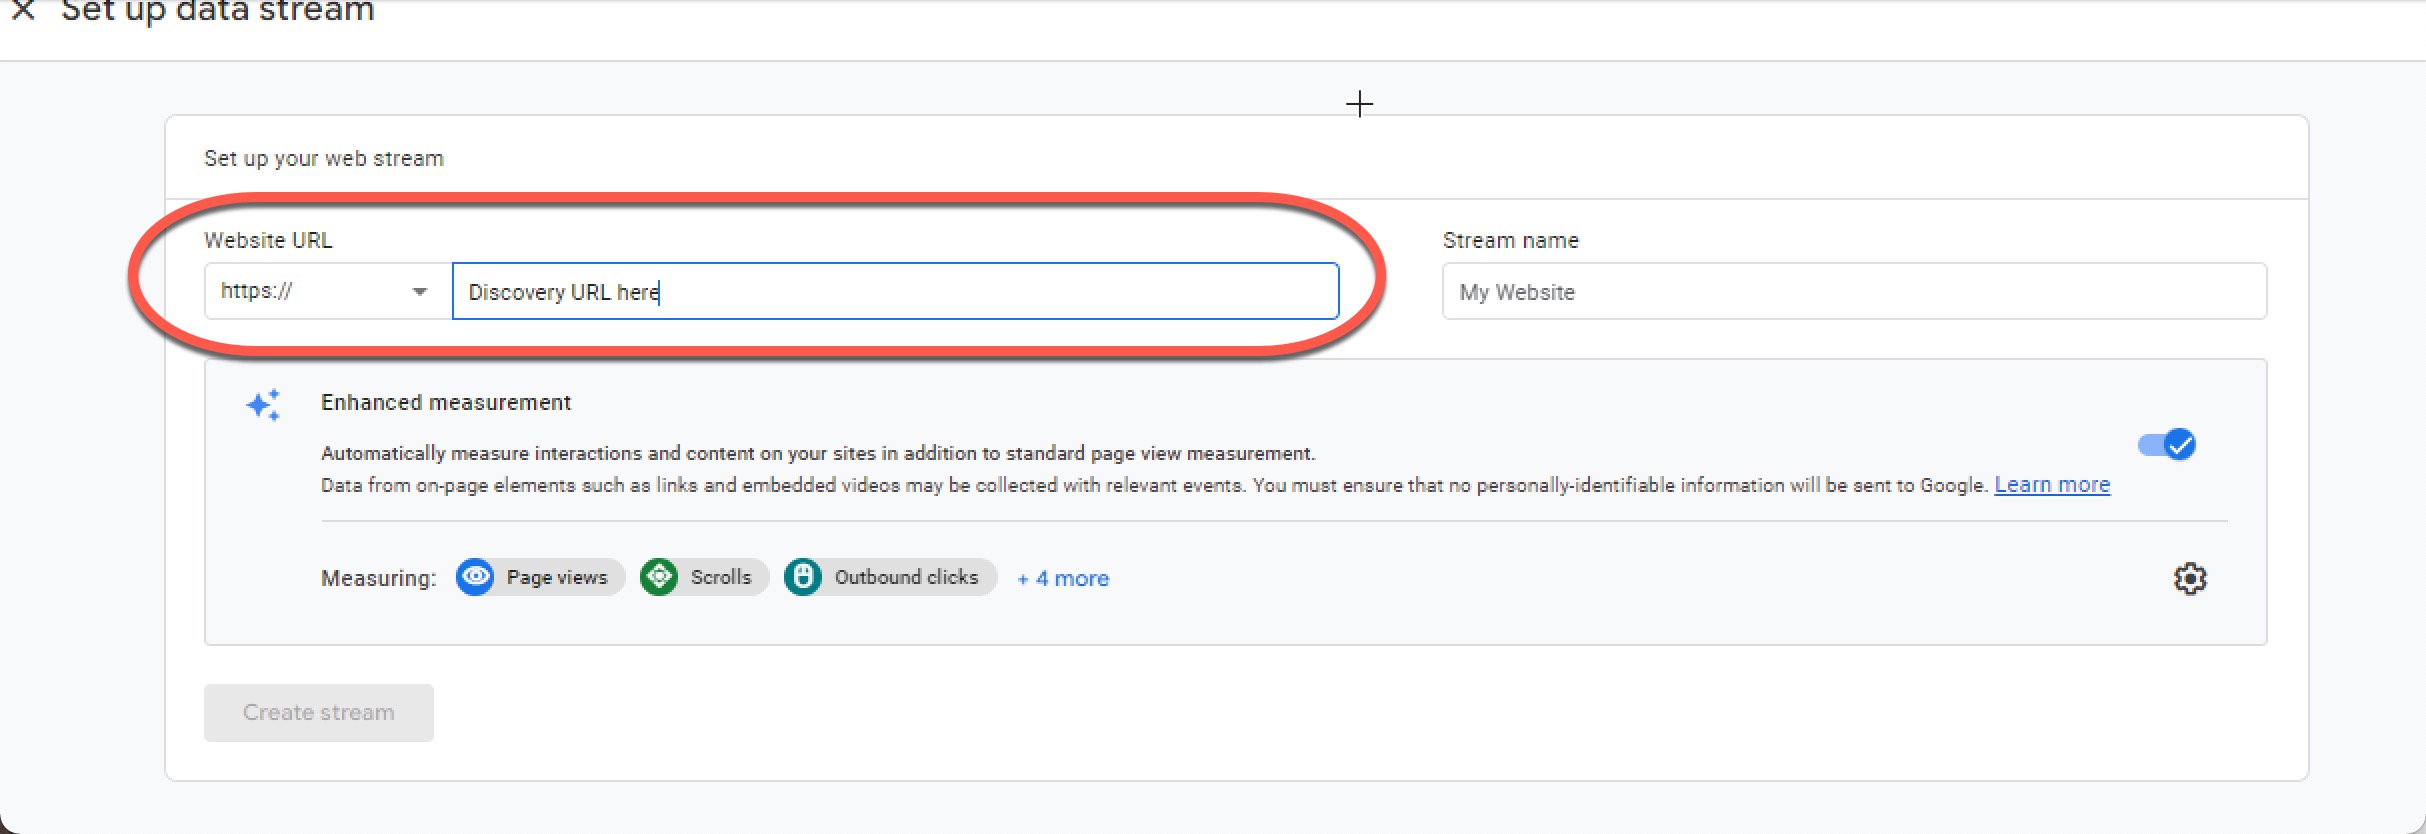 Screenshot of the Google Analytics screen for setting up a data stream, demonstrating to enter your library's Disovery URL in the "Website URL" field.